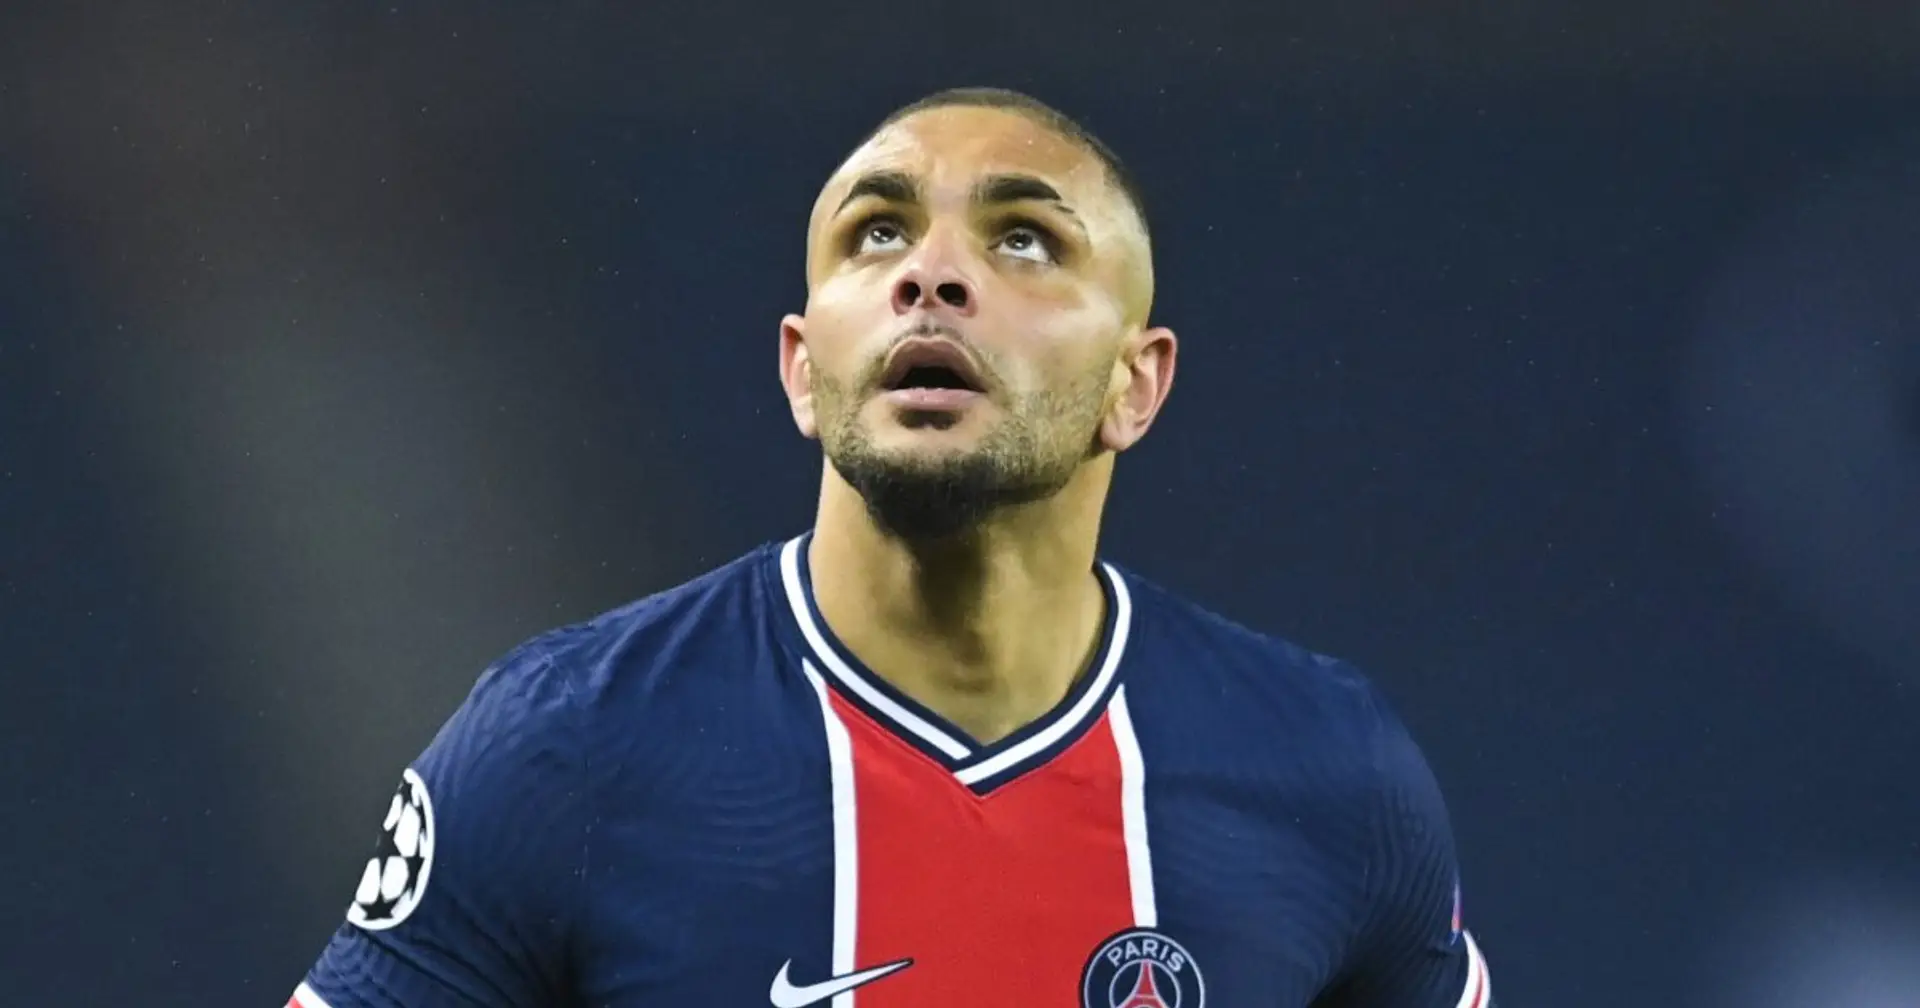 Chelsea interested in loan deal for PSG left-back Layvin Kurzawa - Sky Sports (reliability: 4 stars)